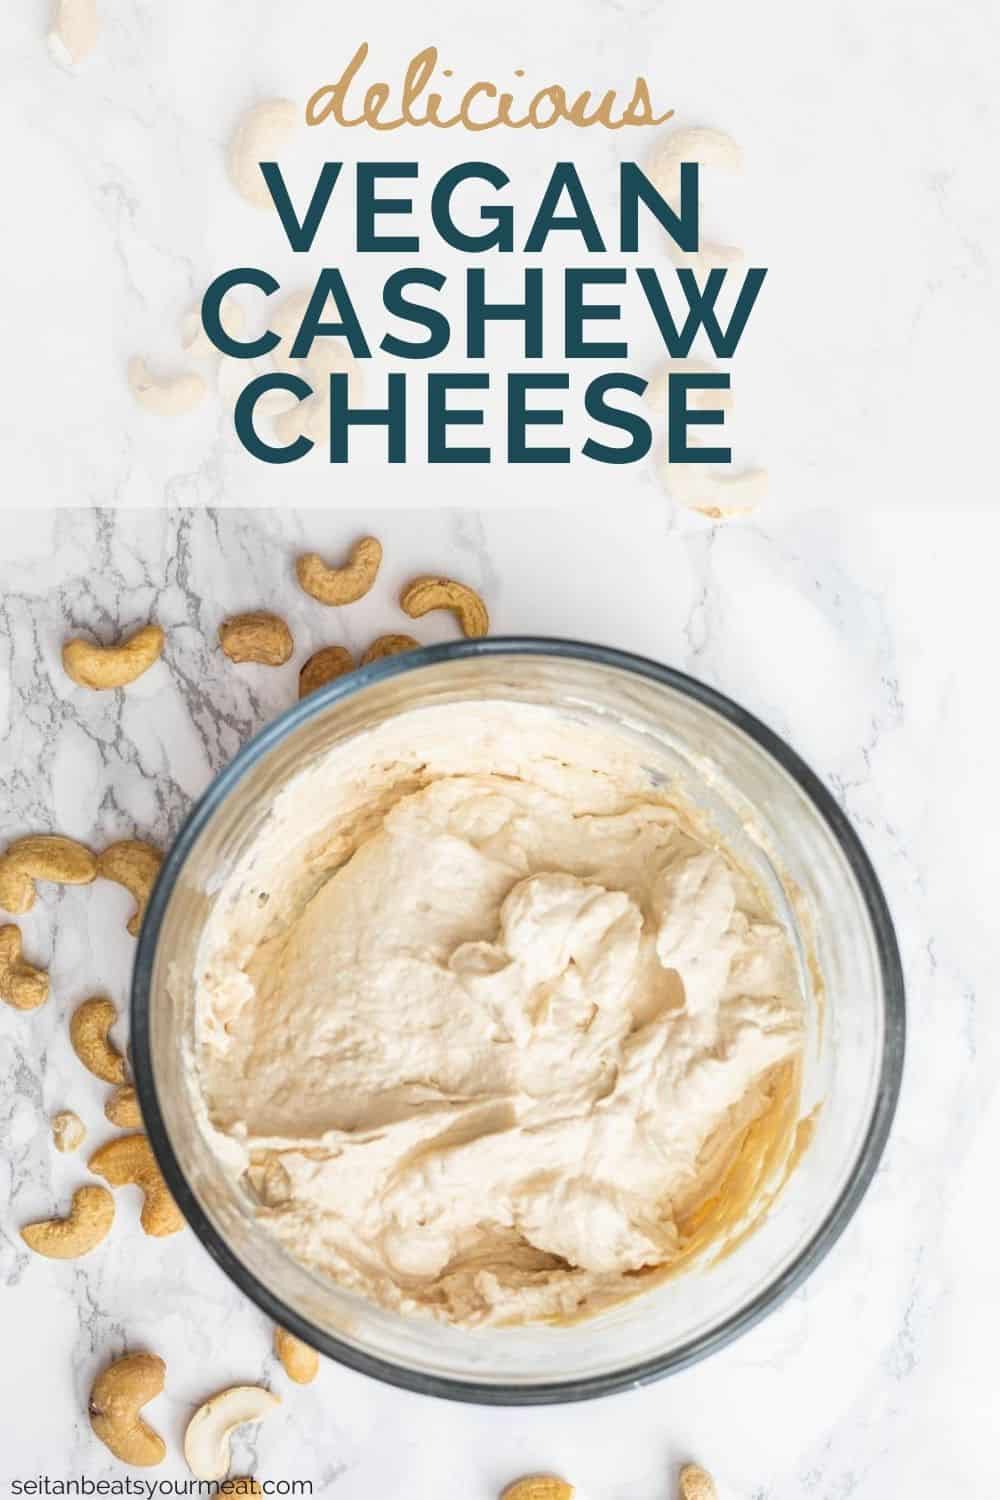 Cultured cashew cheese in glass dish surrounded by whole cashews on counter with text overlay "Delicious Vegan Cashew Cheese"